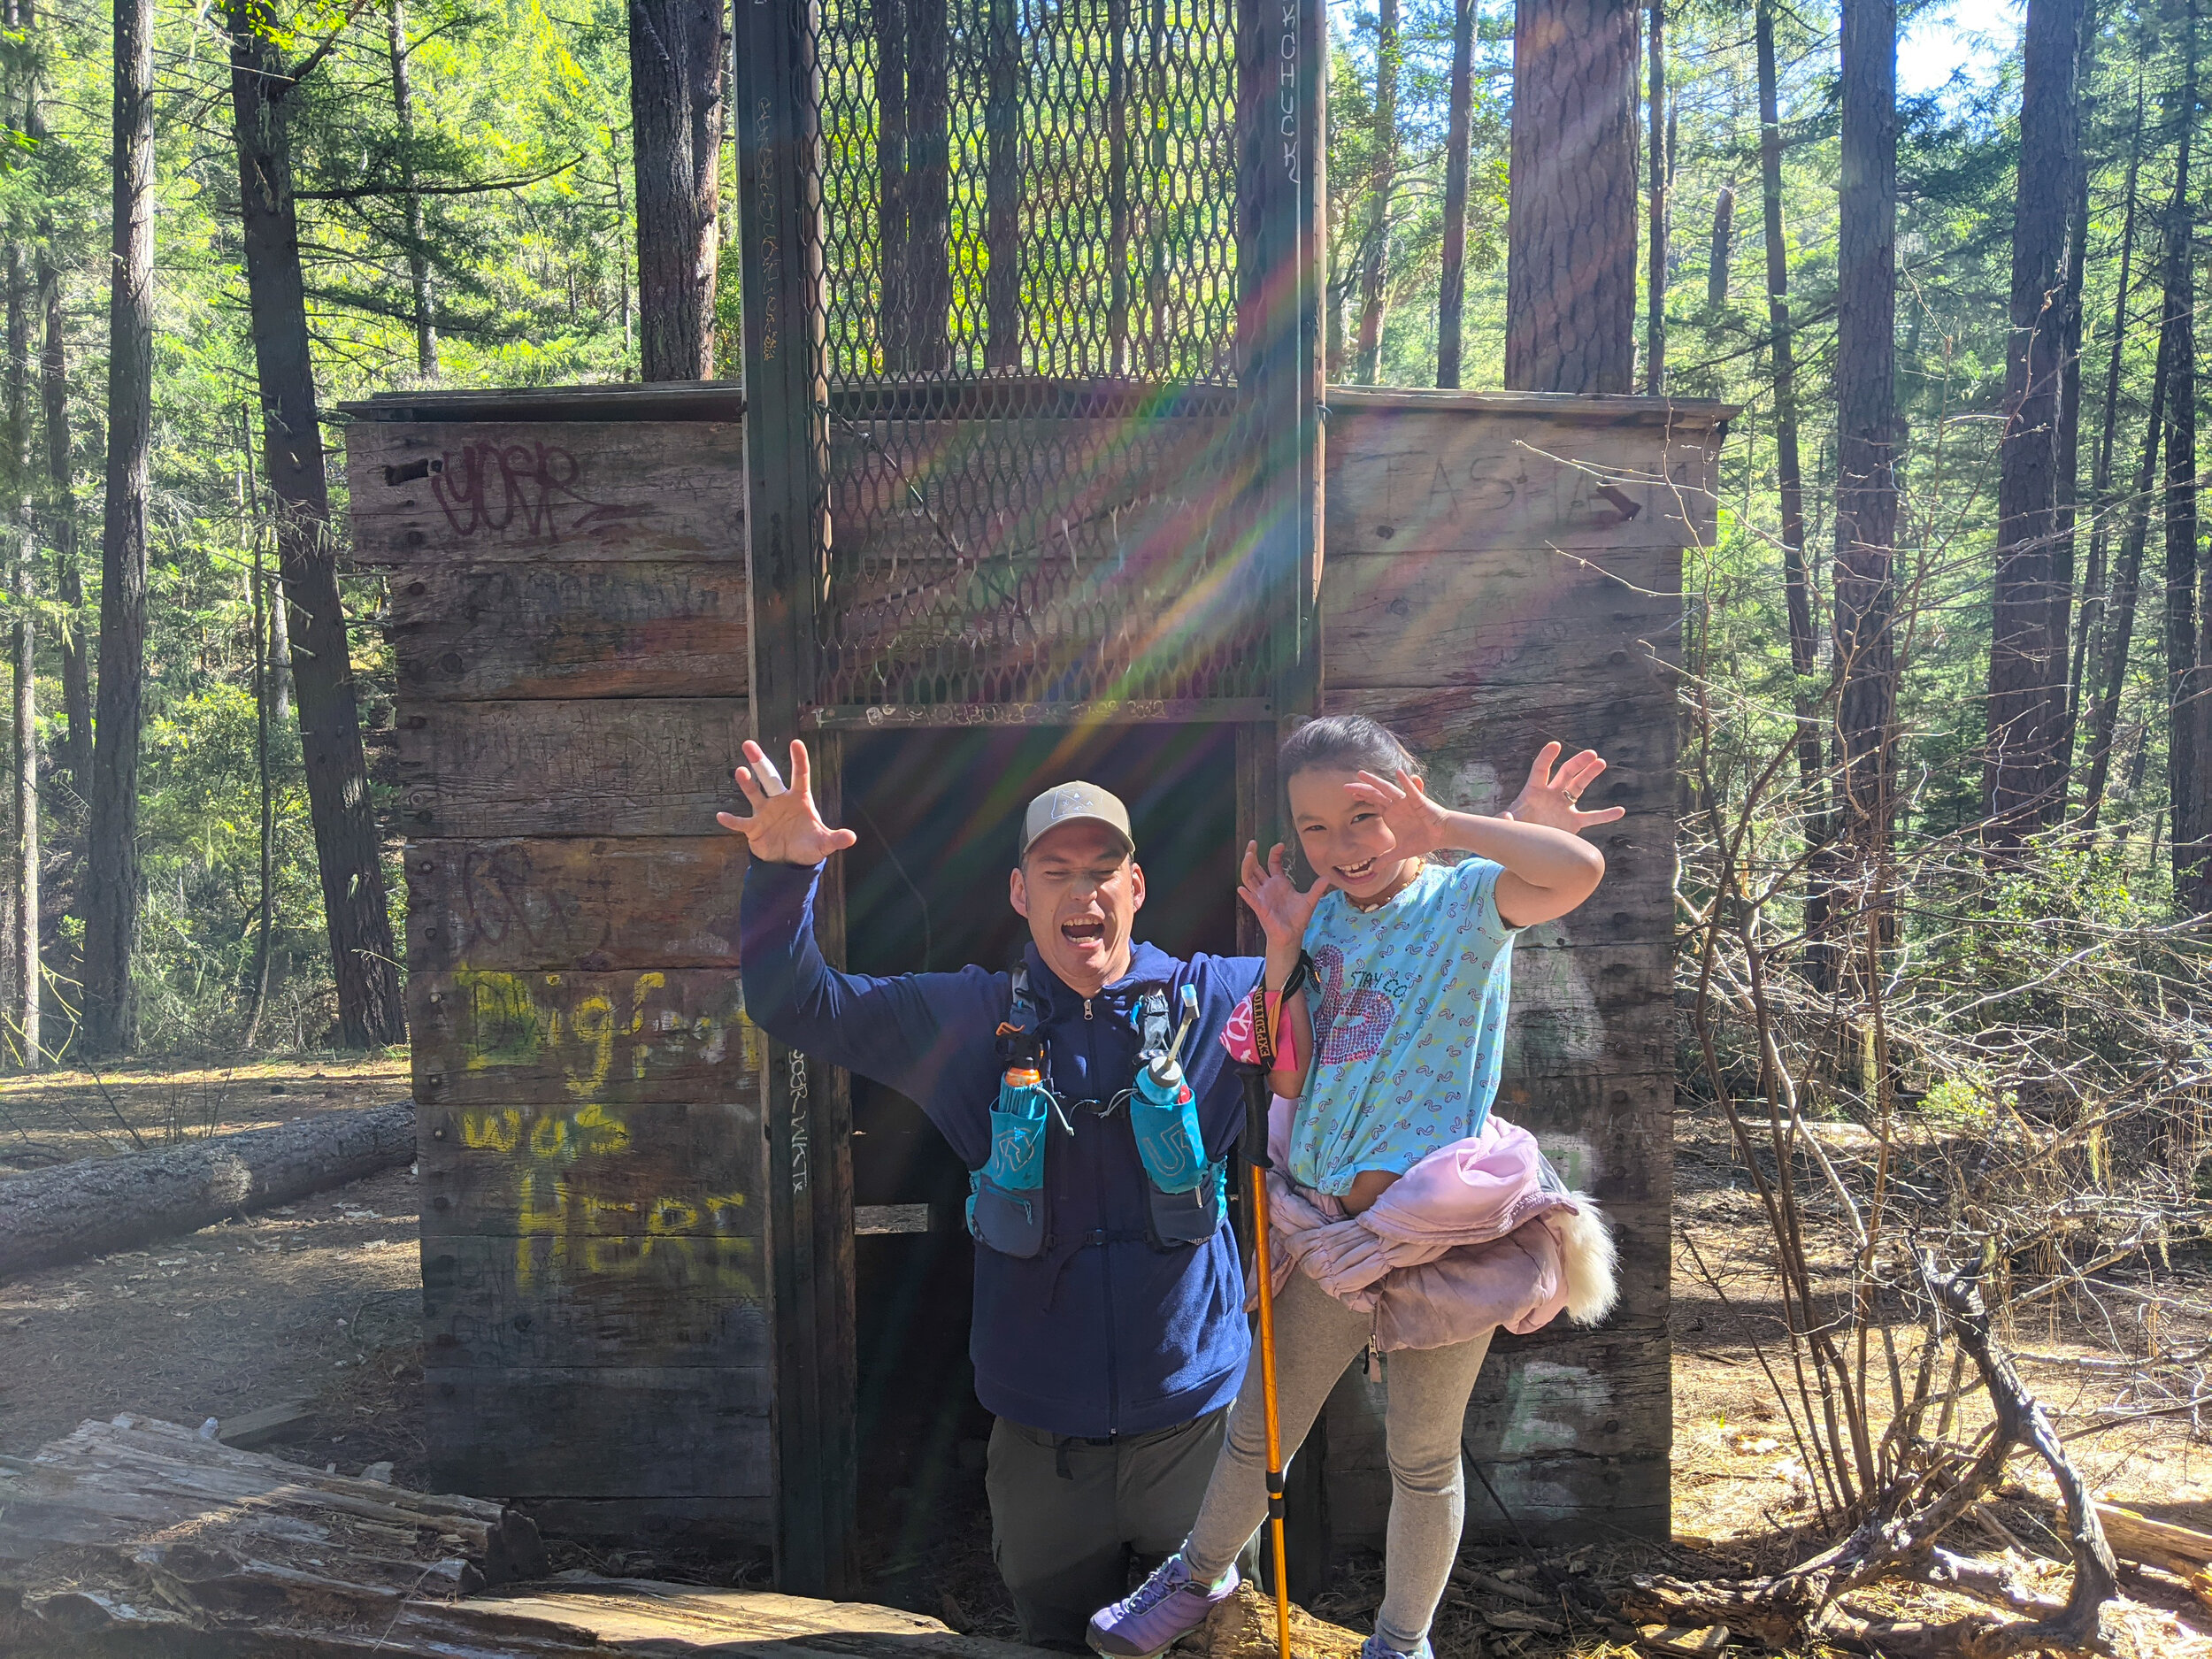 BIGFOOT TRAP &amp; HIKING GROUSE LOOP - OUR HIKING ADVENTURES WITH KIDS